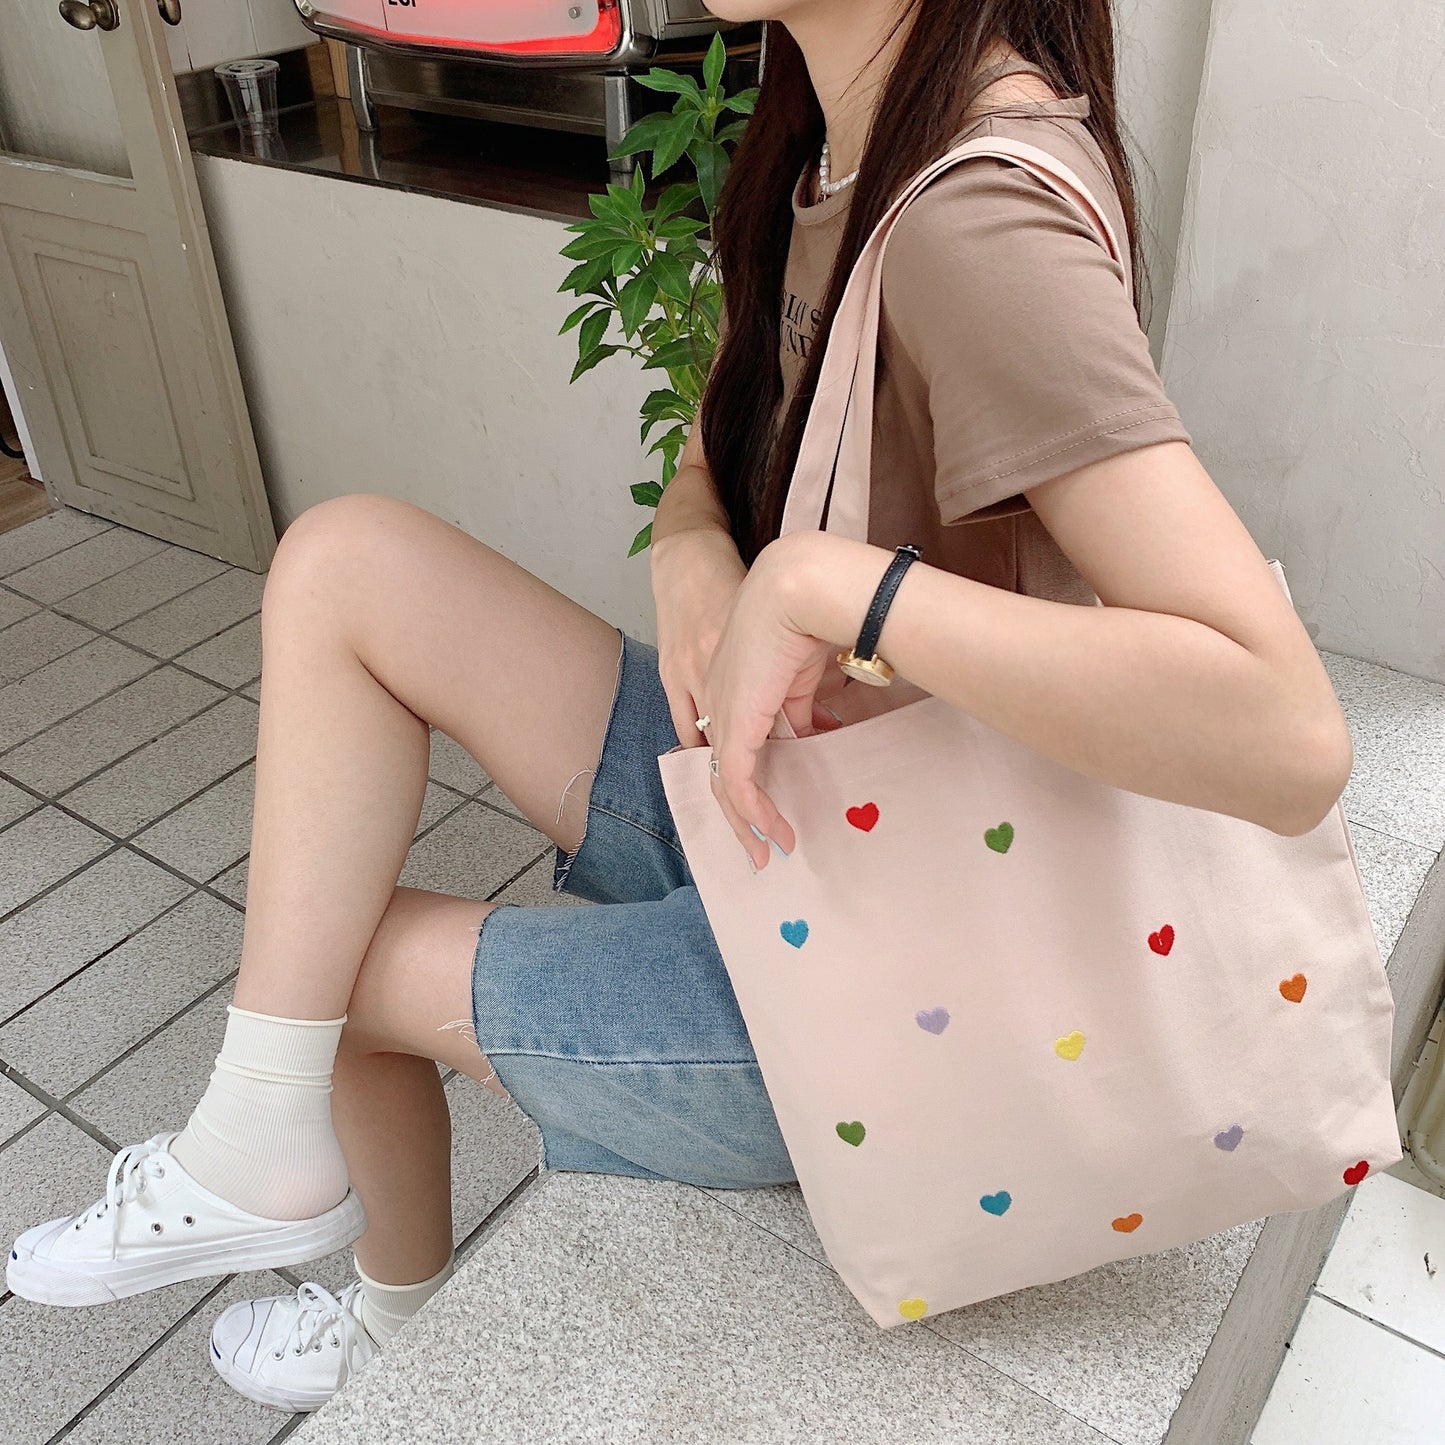 Candy Hearts Tote Bag